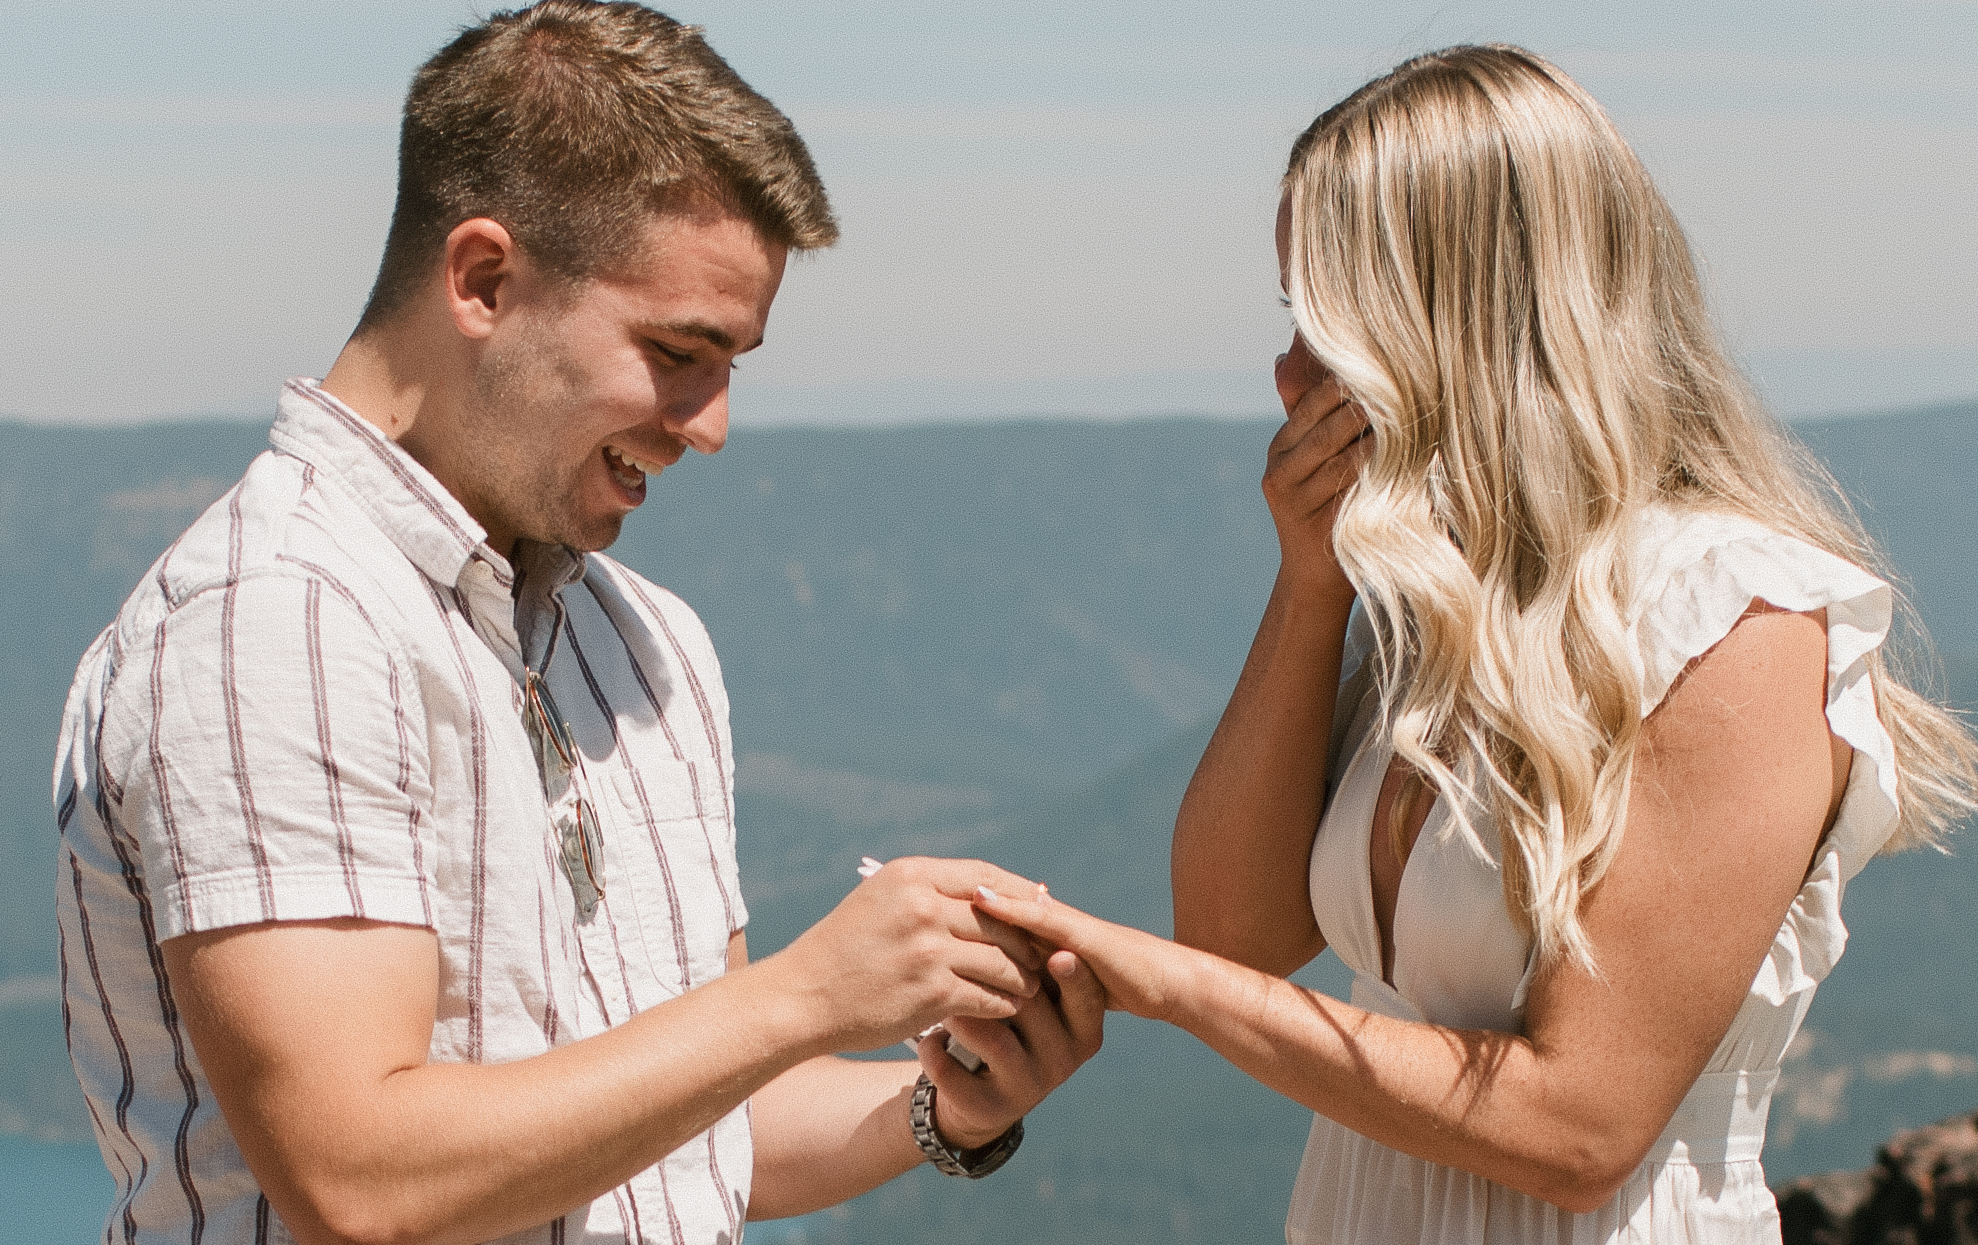 connor putting the ring on laura at oregon proposal